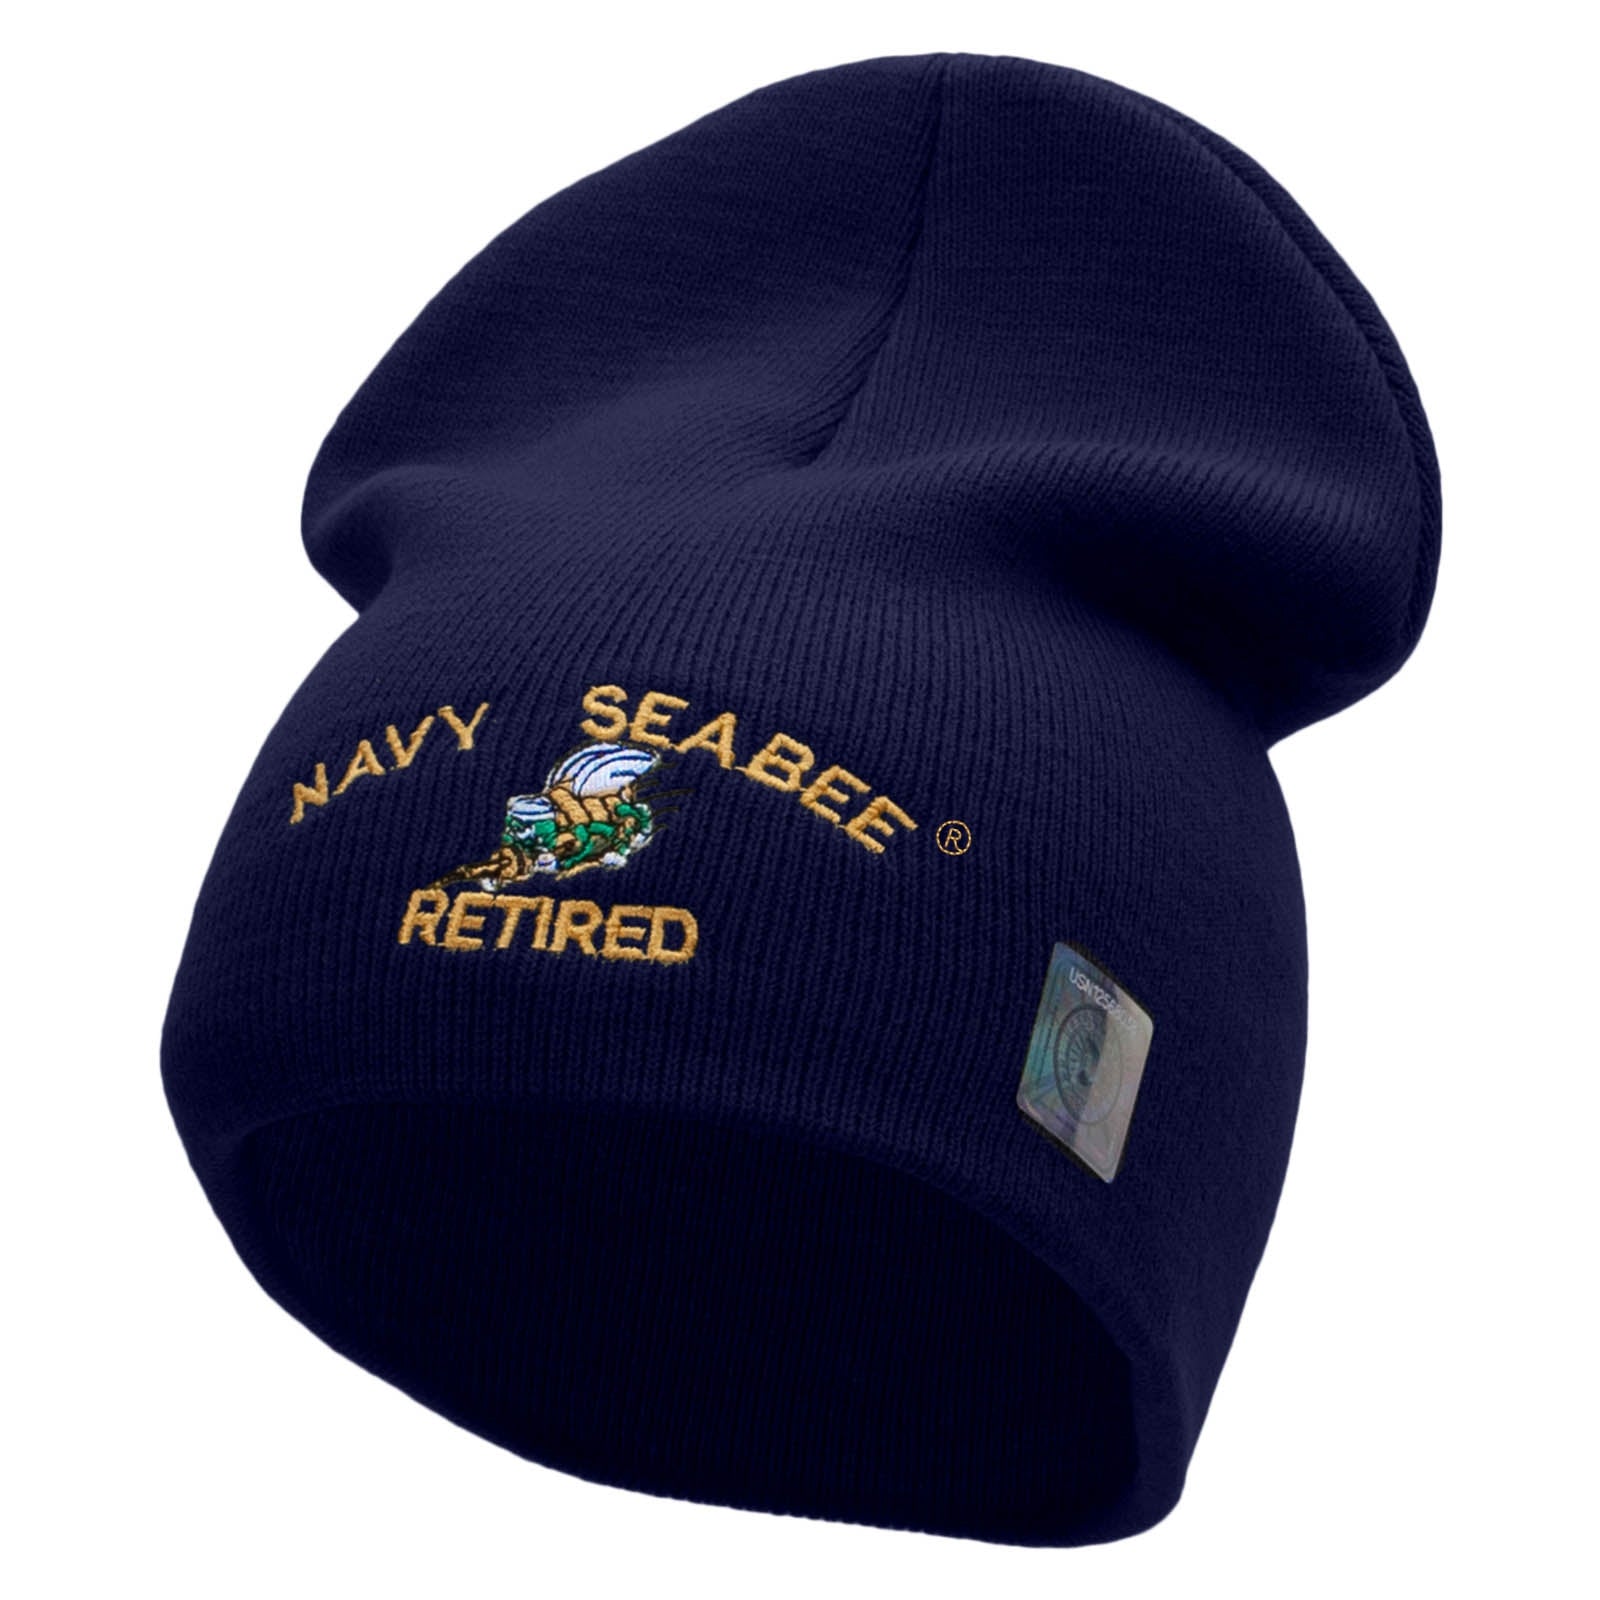 Licensed Navy Seabee Retired Embroidered Short Beanie Made in USA - Navy OSFM